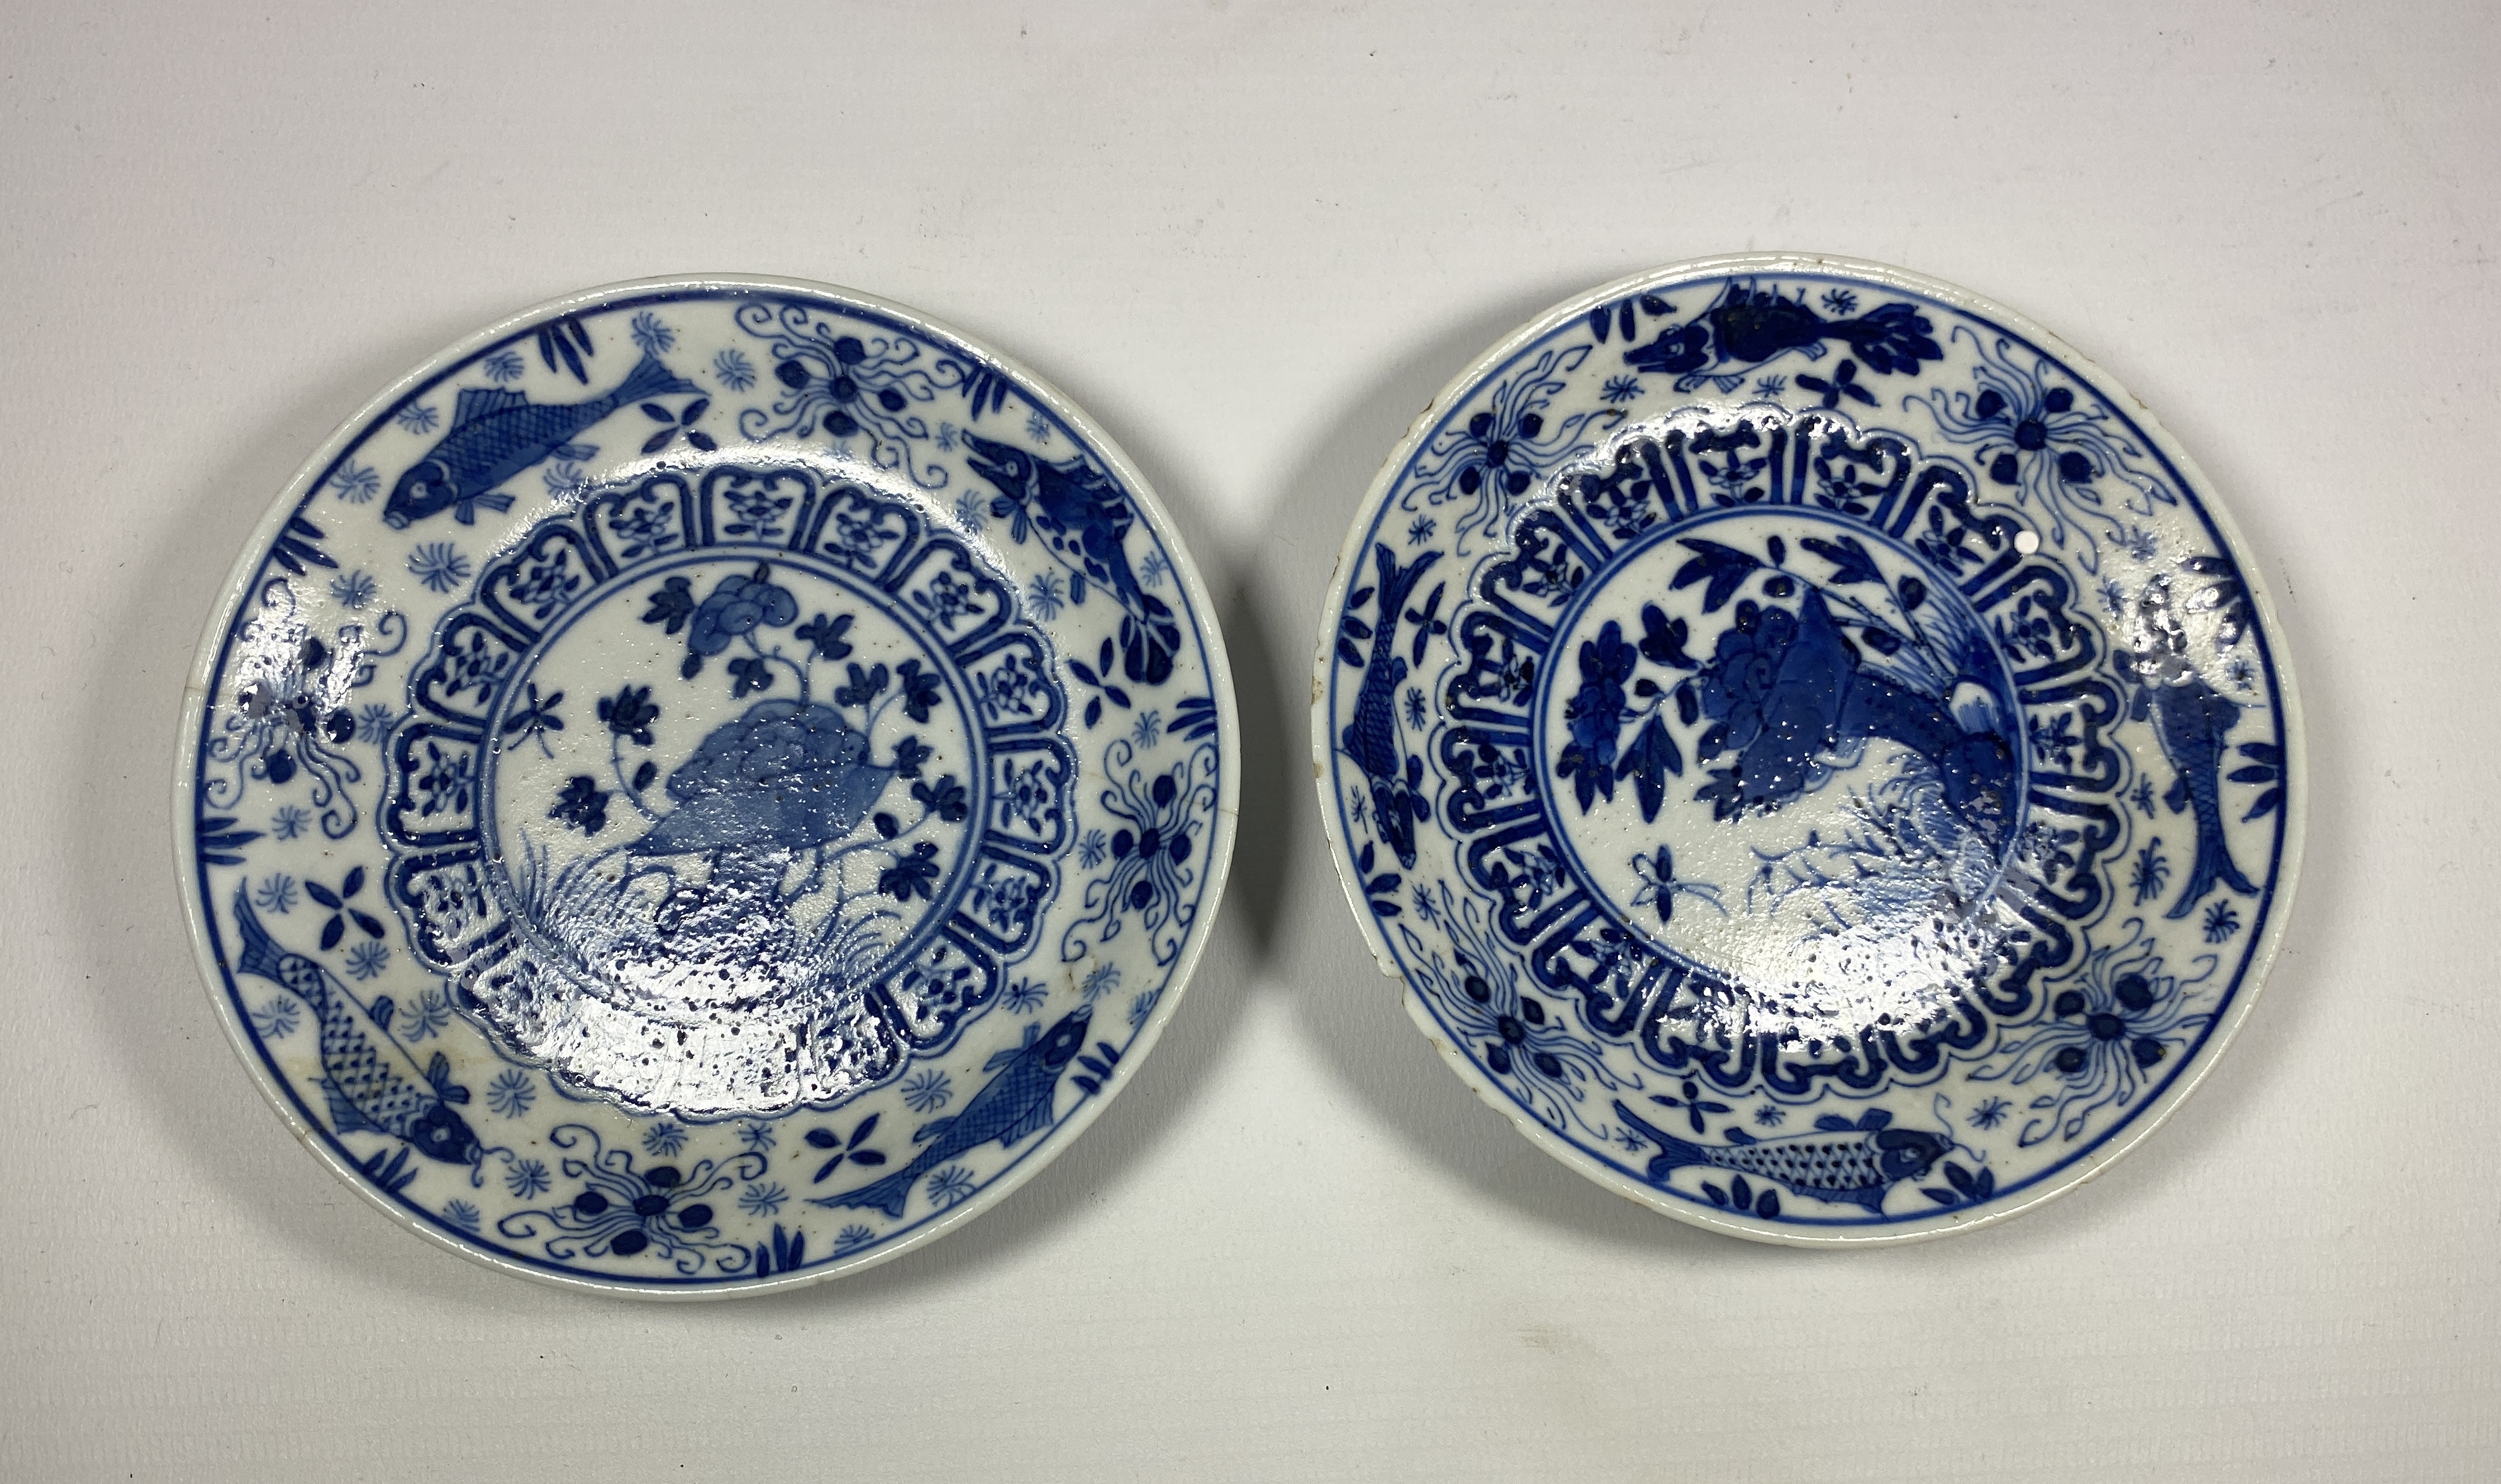 A PAIR OF EARLY 18TH CENTURY, POSSIBLY KANGXI PERIOD (1661-1722), CHINESE PORCELAIN BLUE & WHITE